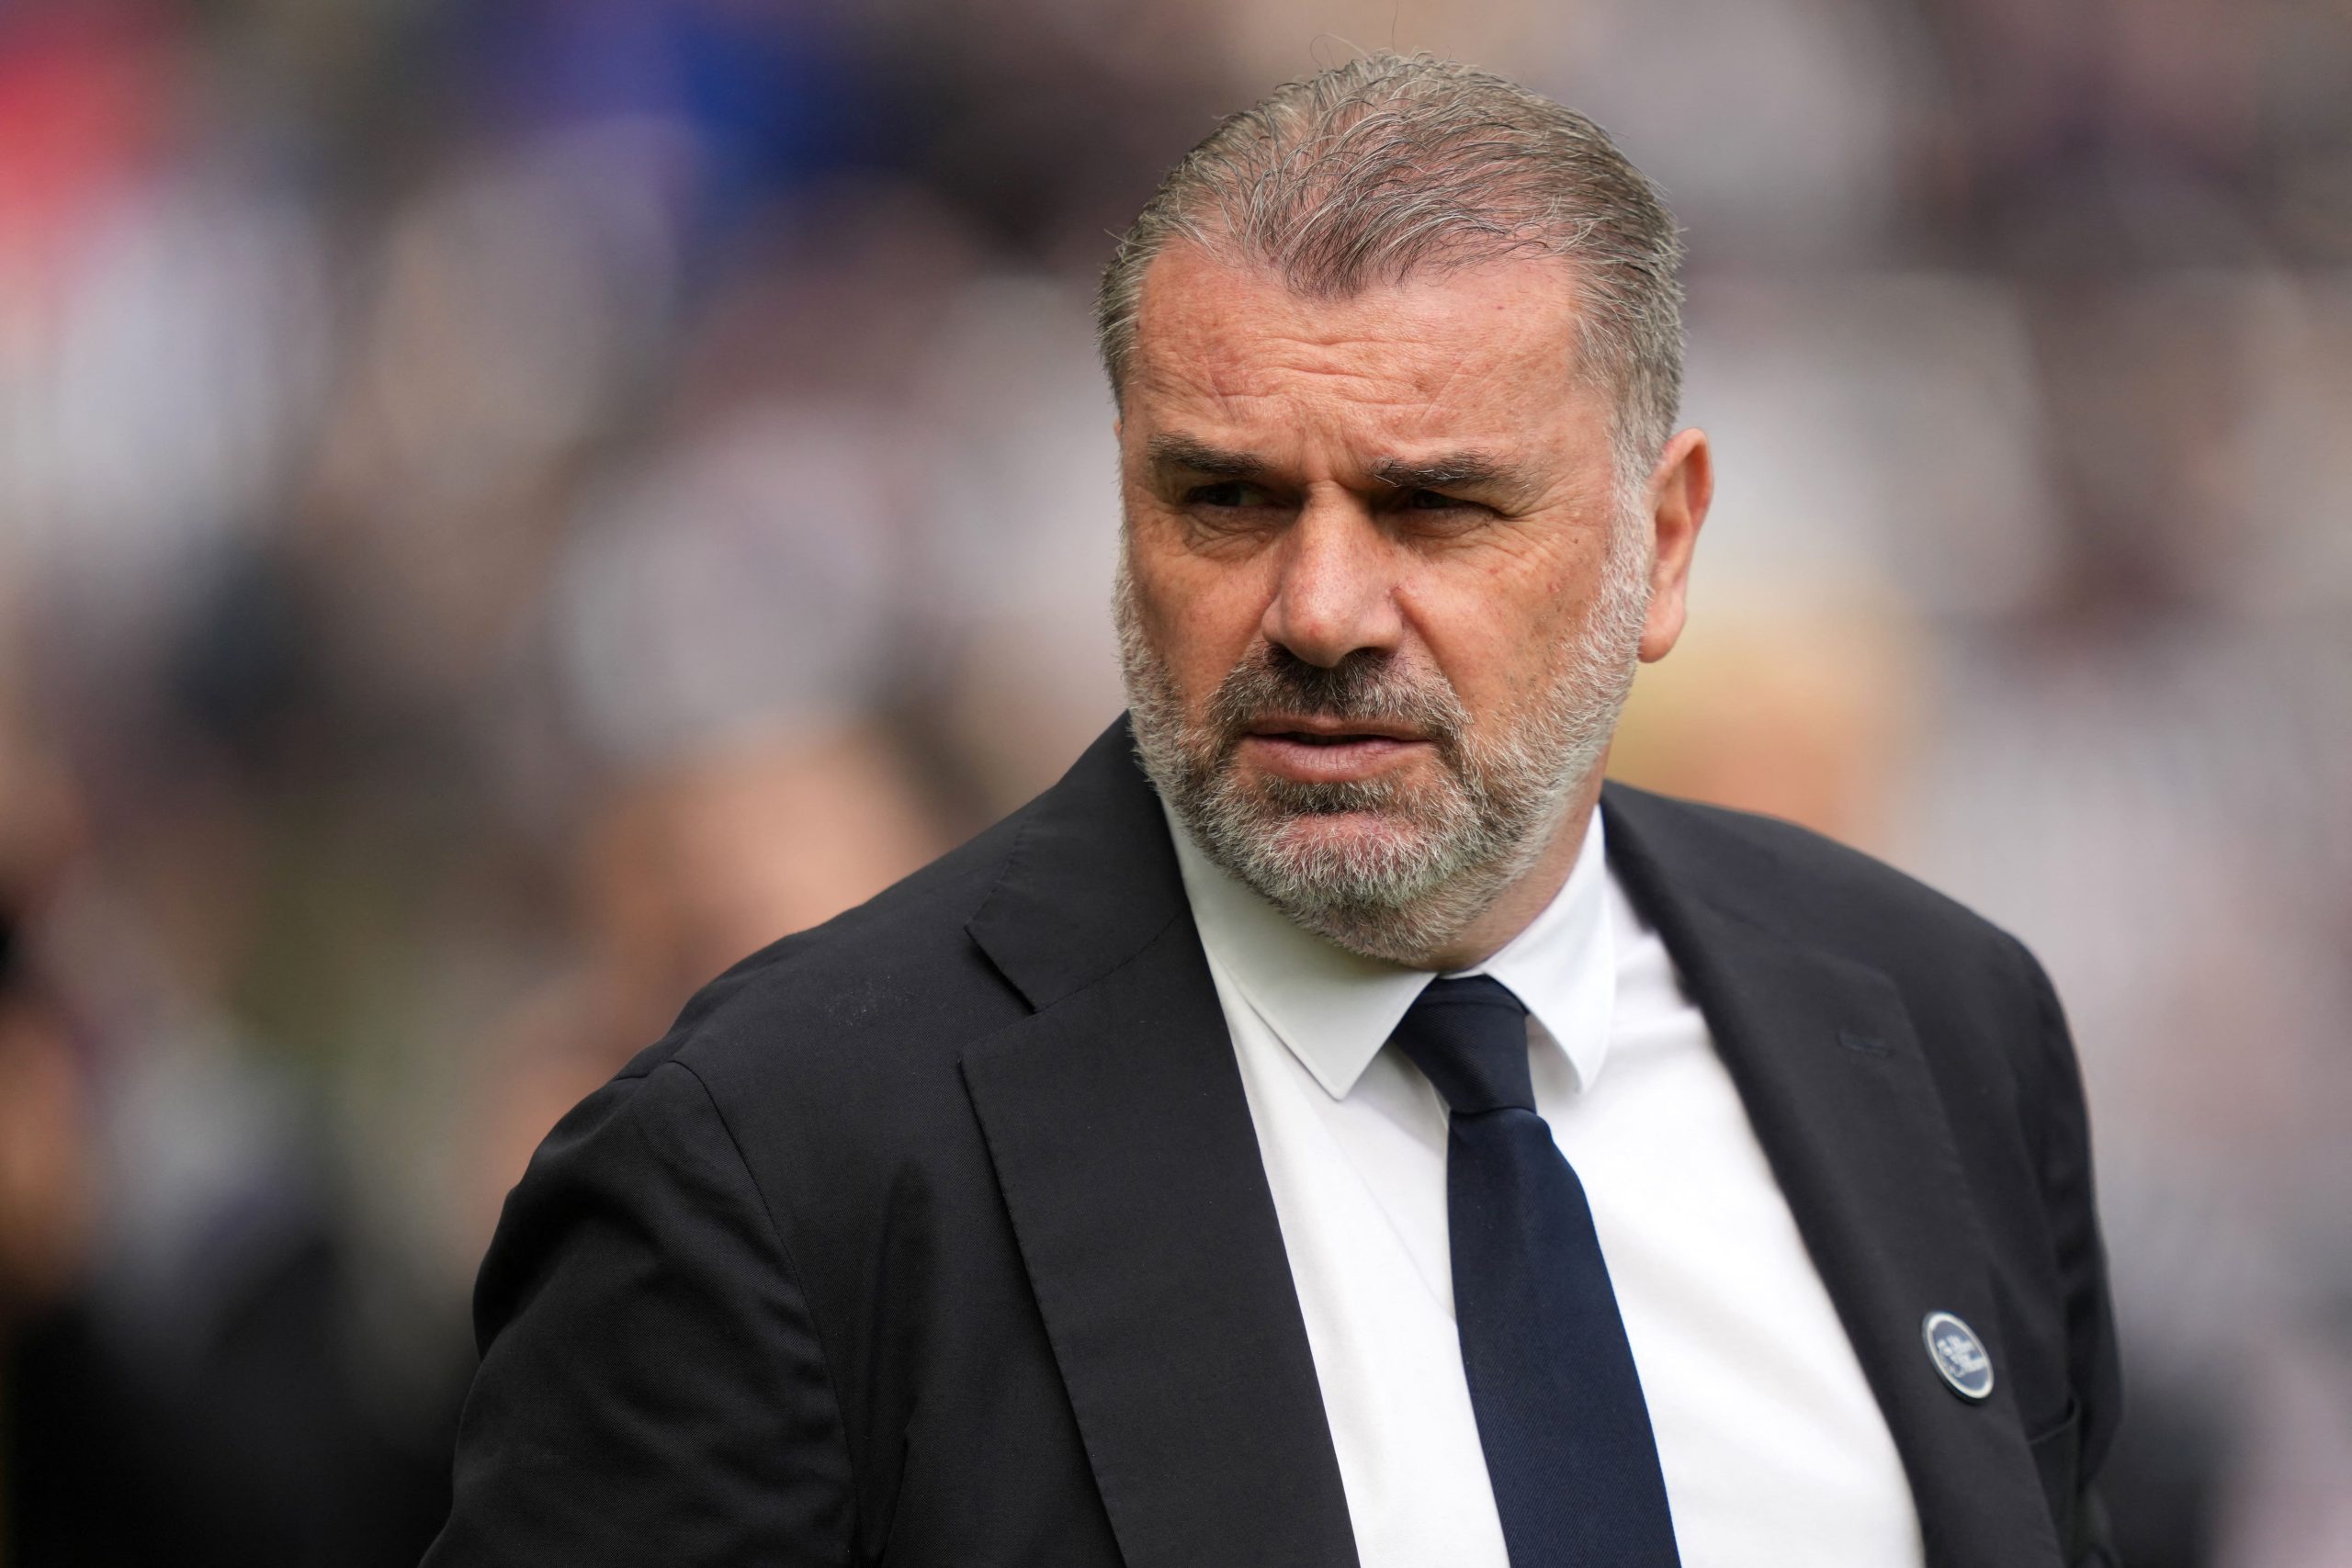 Ange Postecoglou provides an update on his team ahead of the Lilywhites' highly anticipated clash against Arsenal